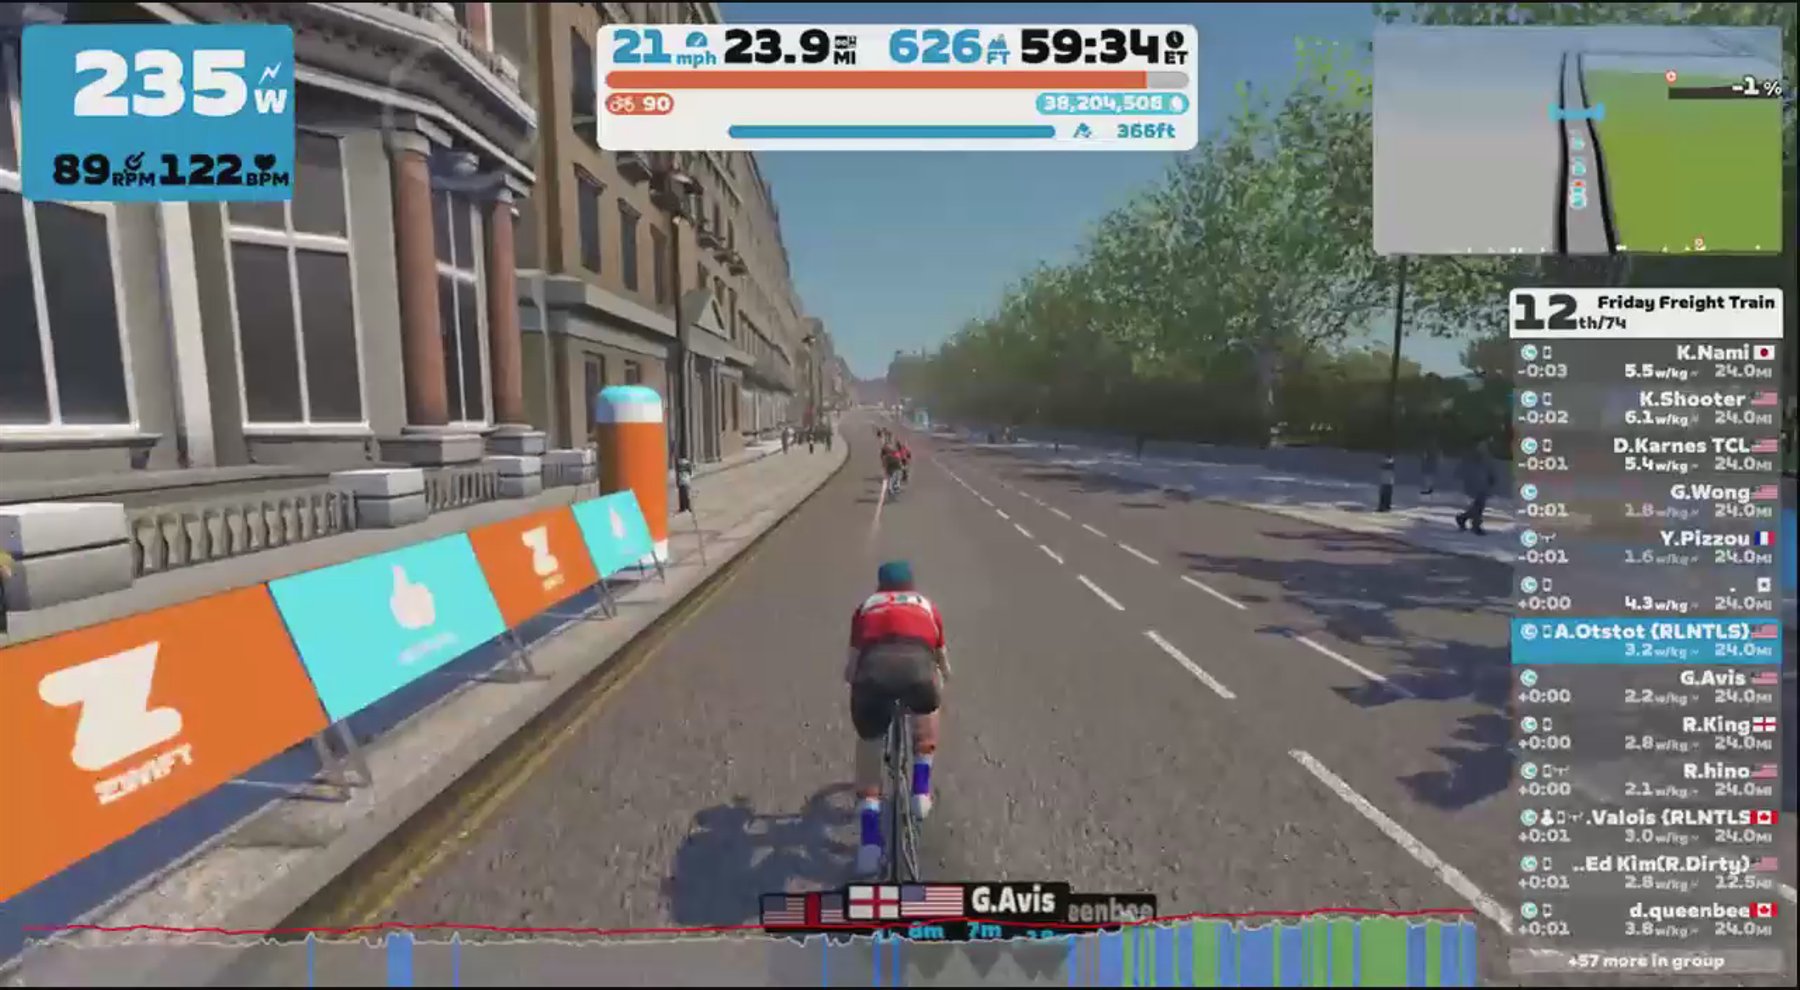 Zwift - Group Ride: Friday Freight Train (C) on Greater London Flat in London